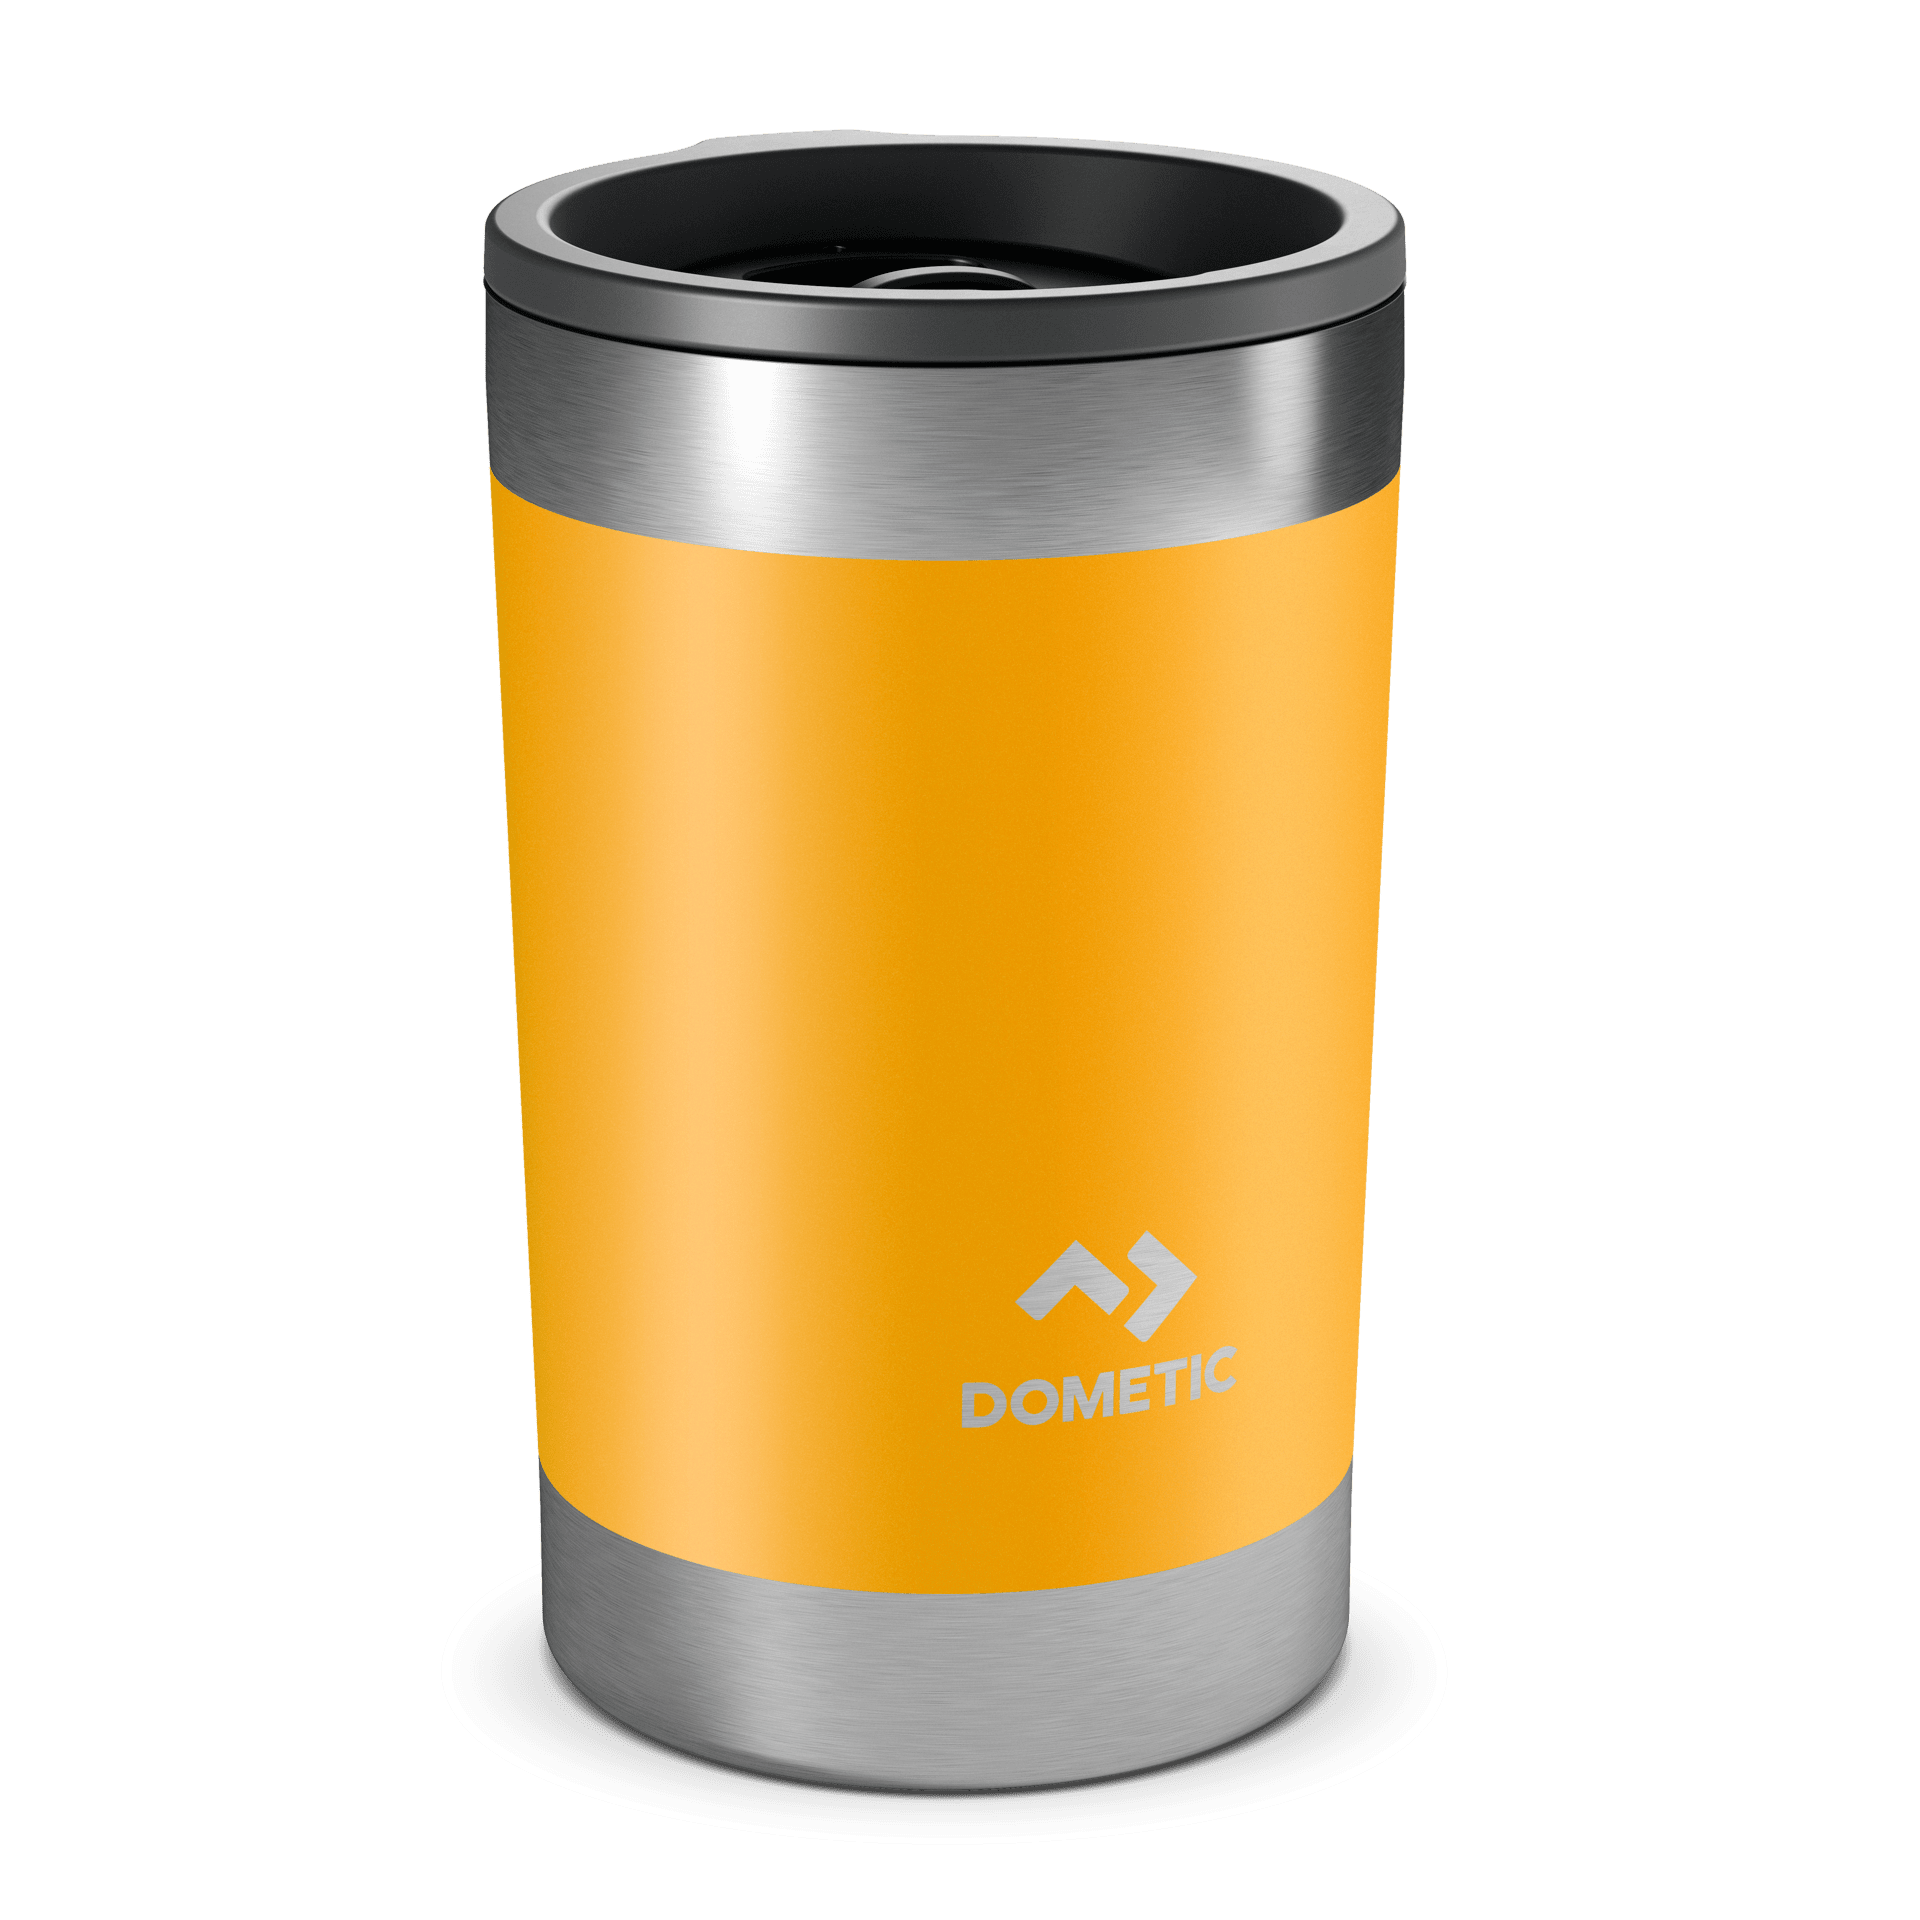 https://www.dometic.com/externalassets/dometic-thermo-tumbler-32_9600029347_94833.png?ref=-441096392